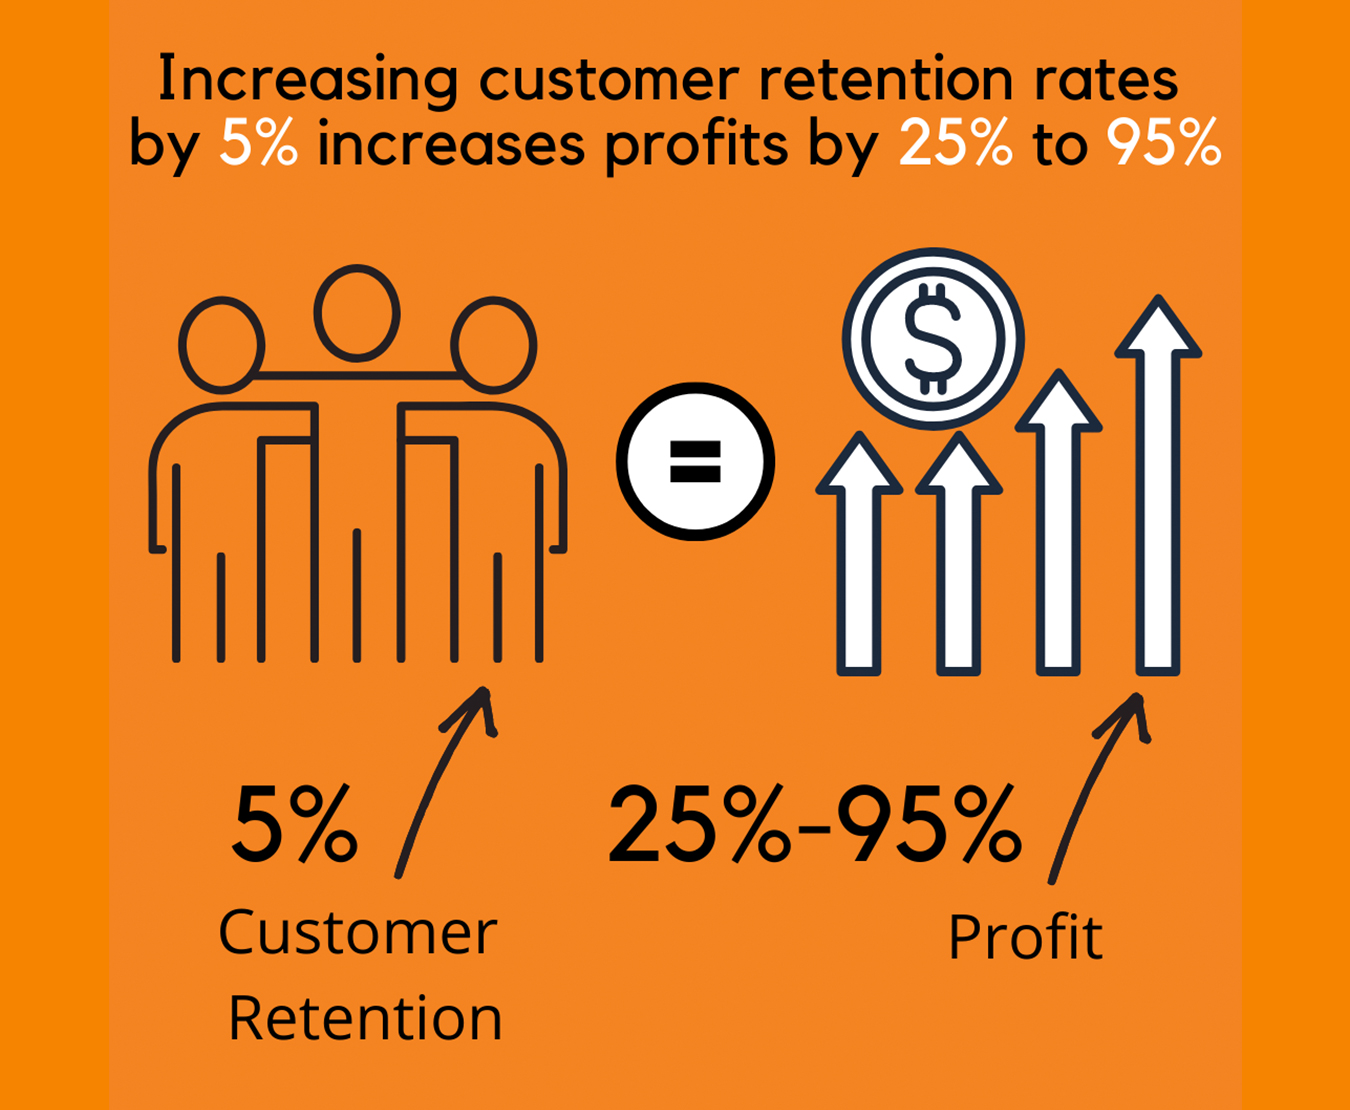 Website Content Strategies for Customer Retention supports profit growth. Images shows that 5% increase in customer retention leads to 25% to 95% increase in profits.